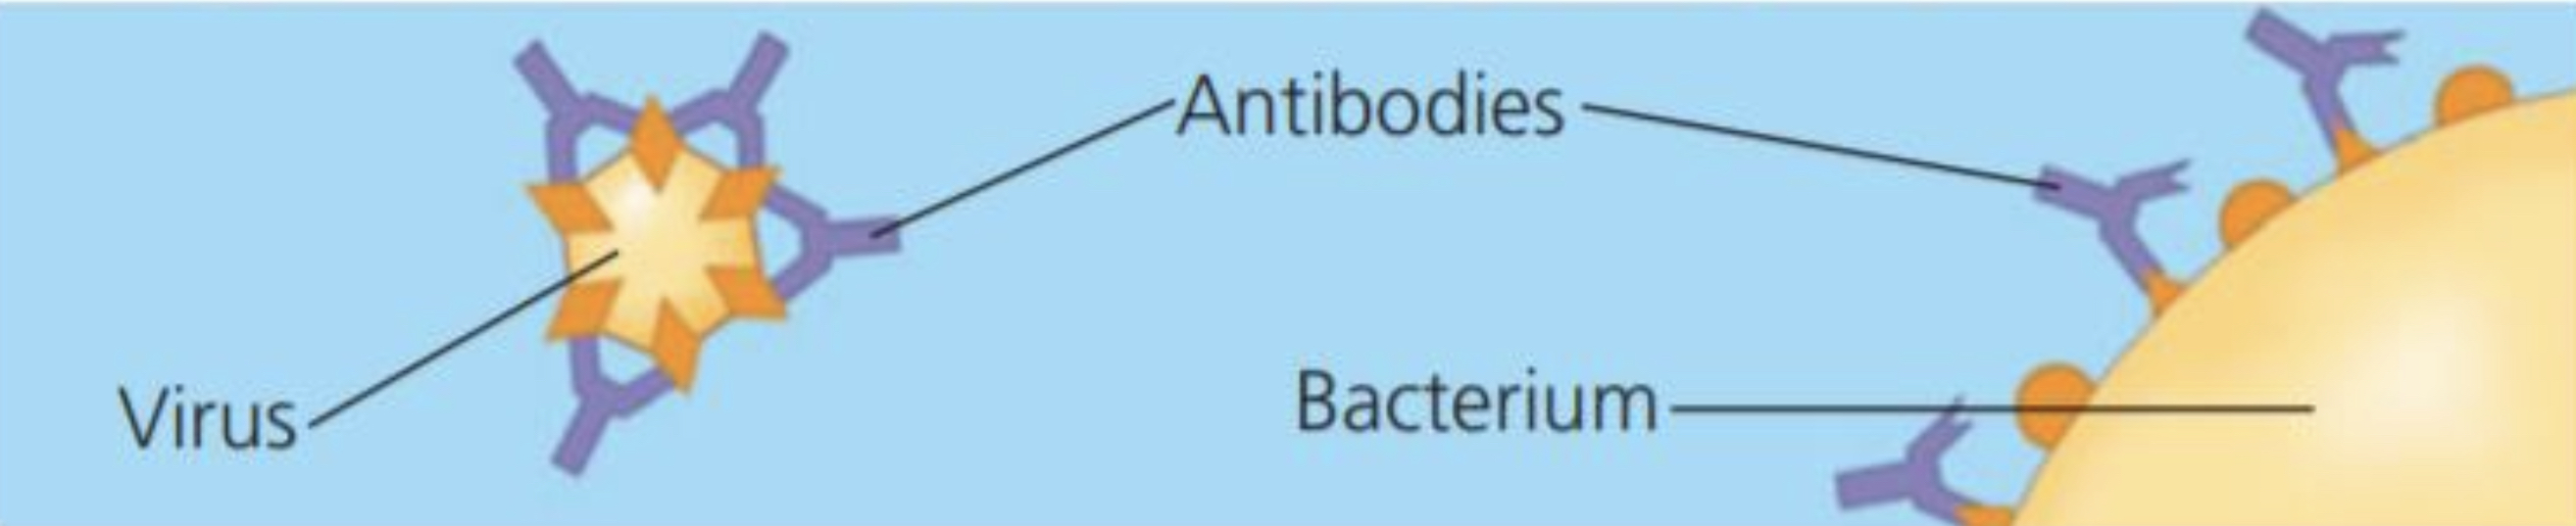 <p>Function: protection against disease Example: Antibodies inactivate and help destroy viruses and bacteria</p>